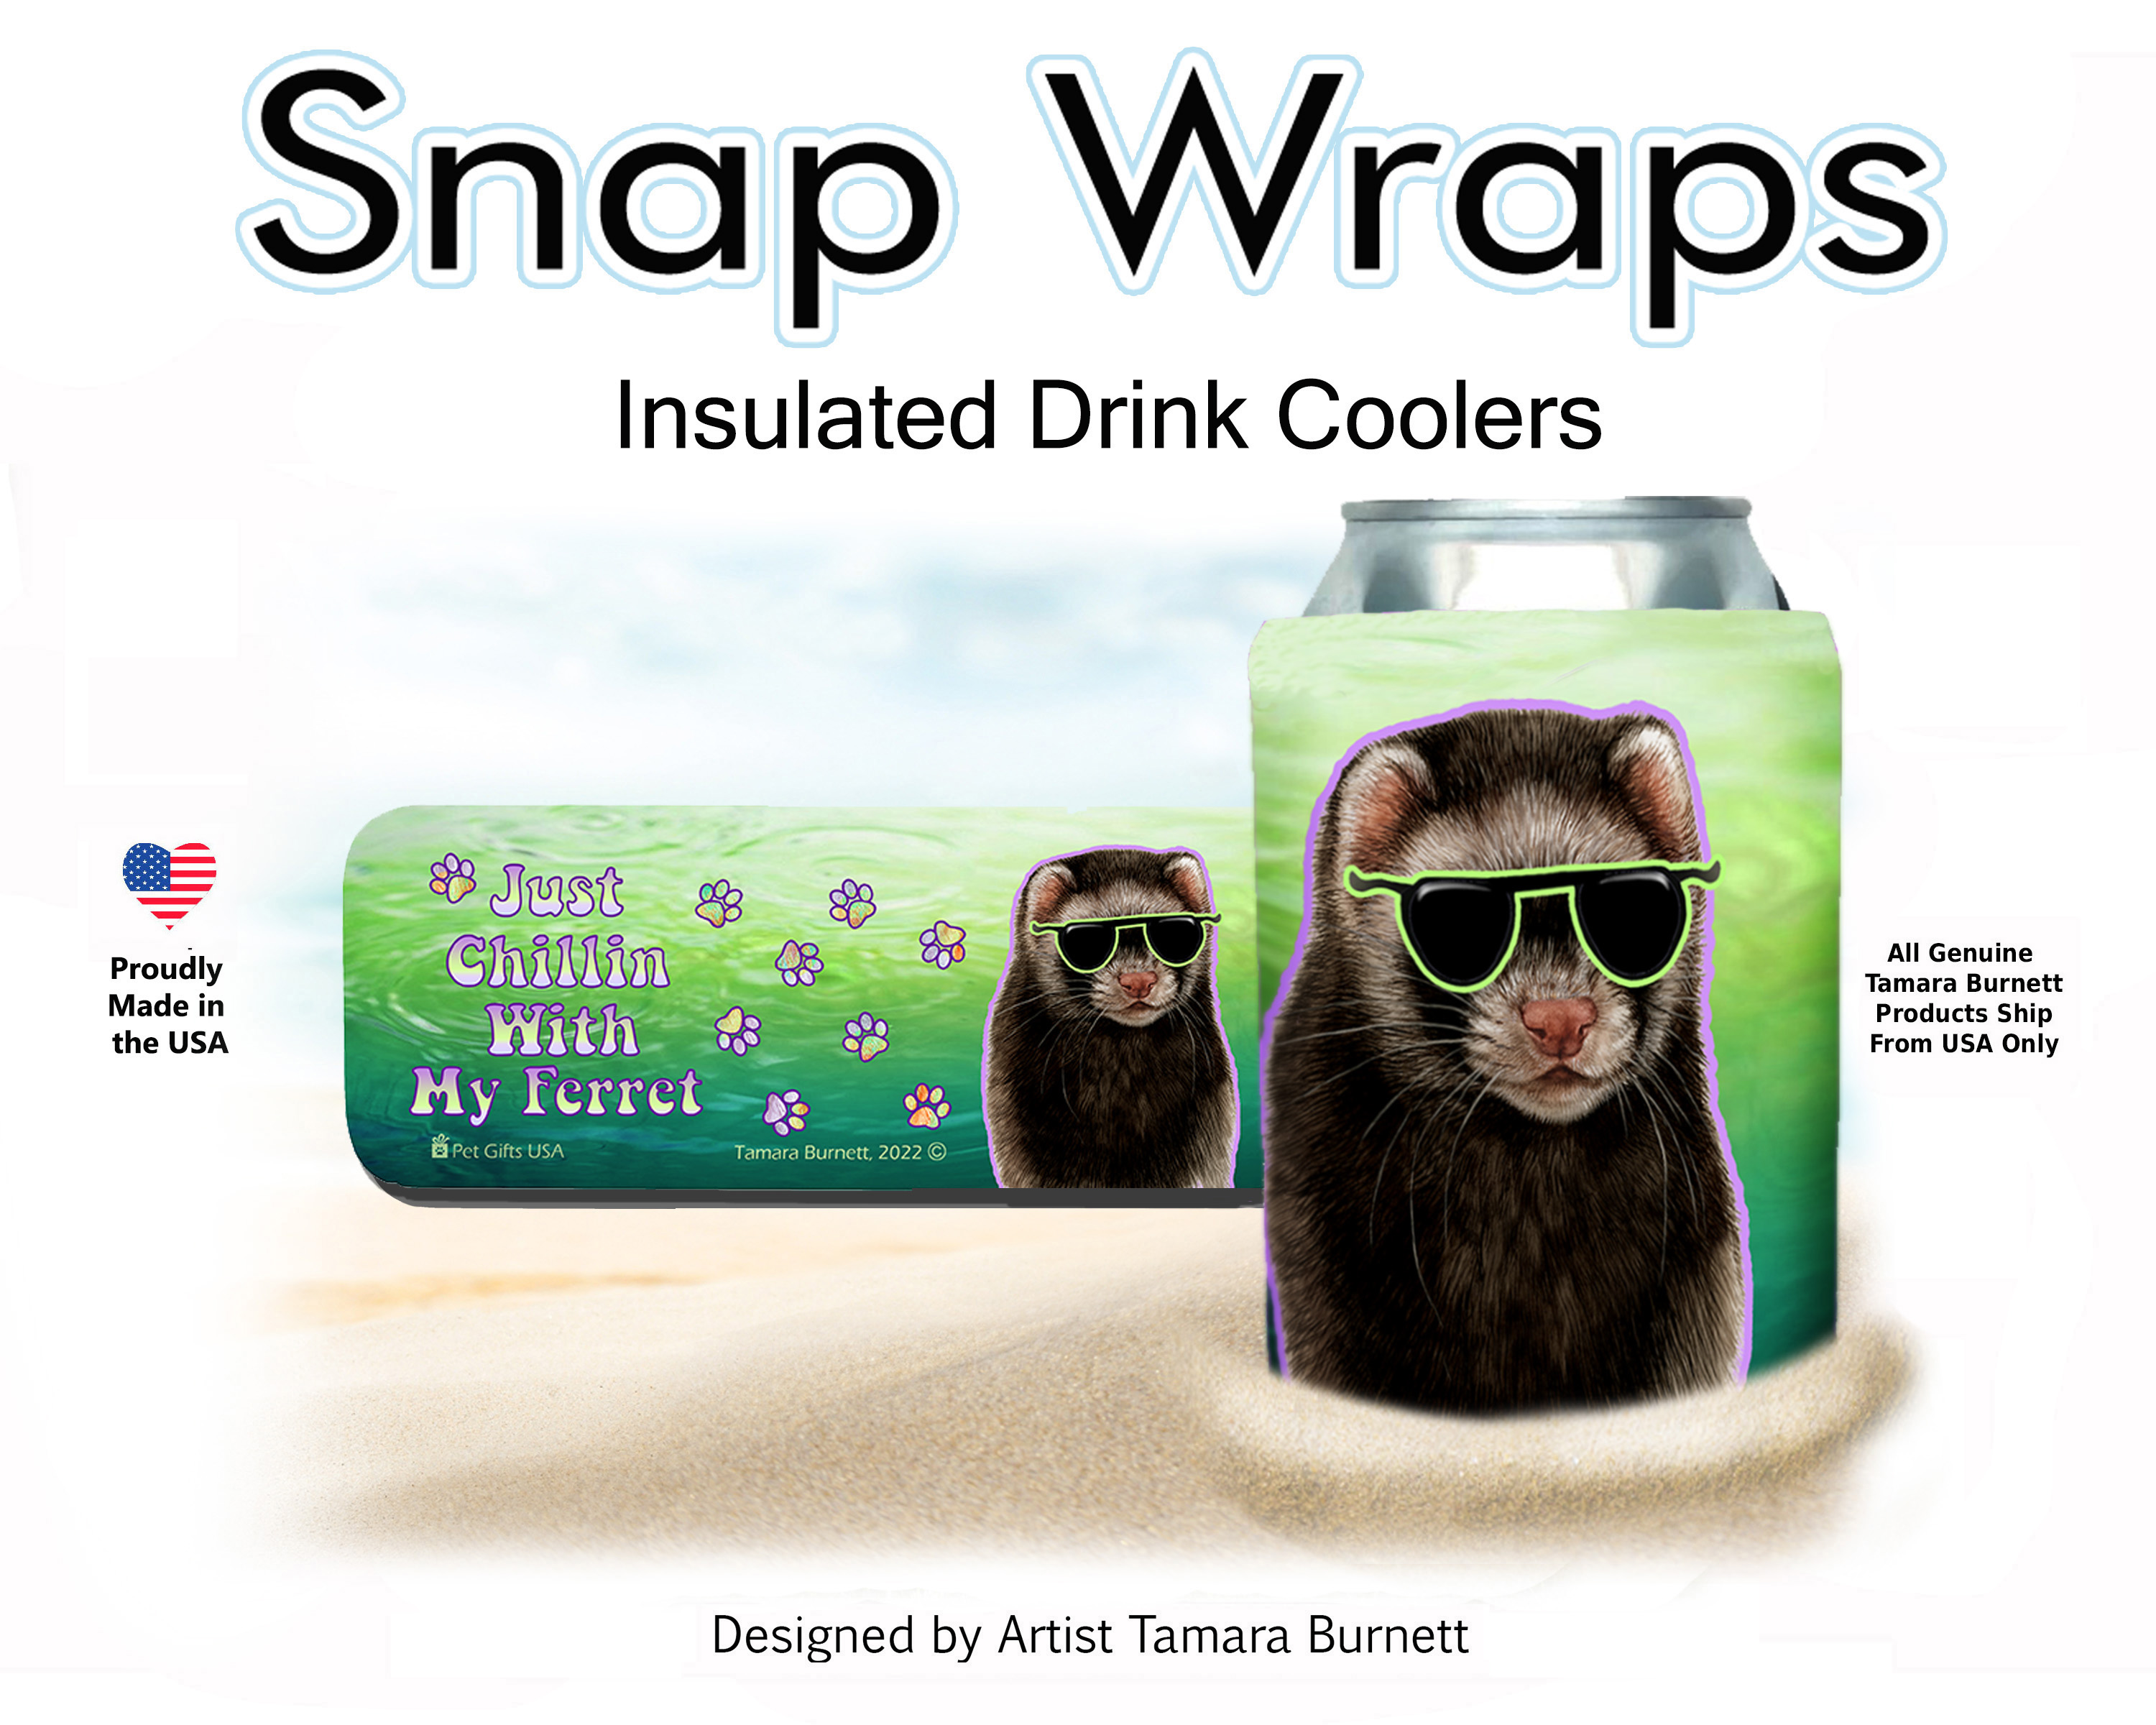 An image of the Ferret Black Sable Snap Wrap Insulated Drink Holder